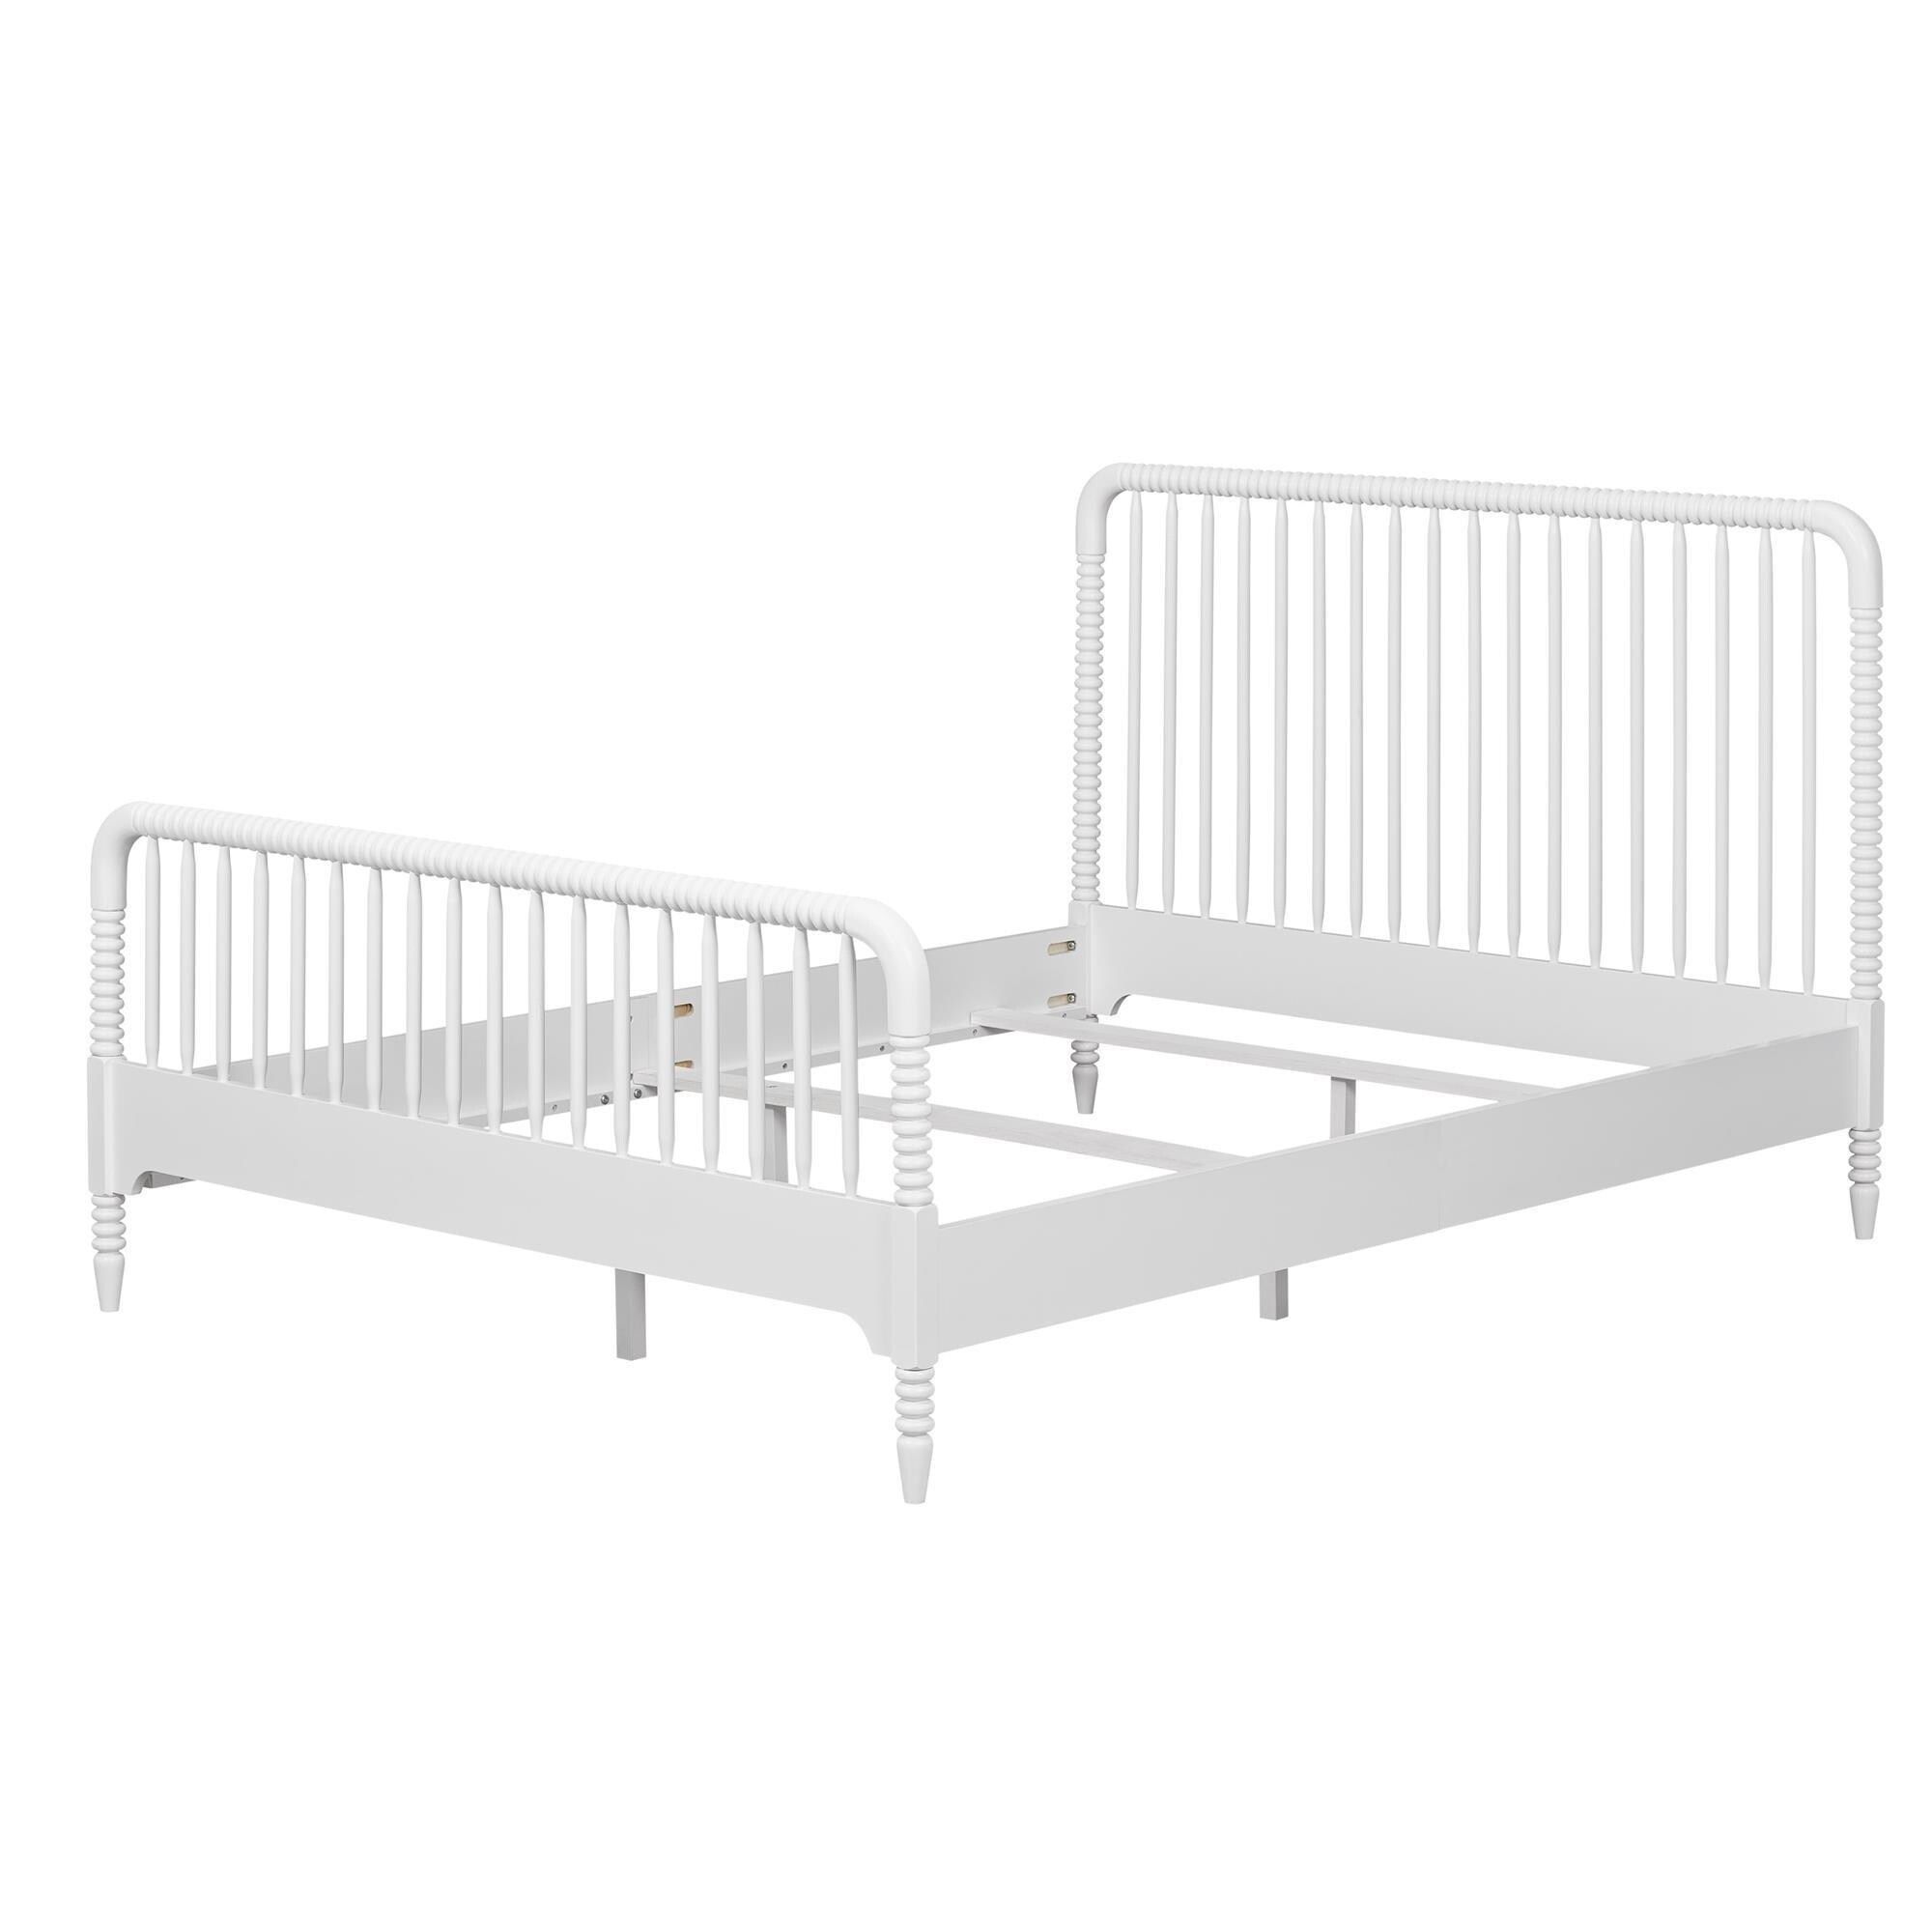 Little Seeds Rowan Valley Linden Full-Size Bed - White | Bed Bath & Beyond